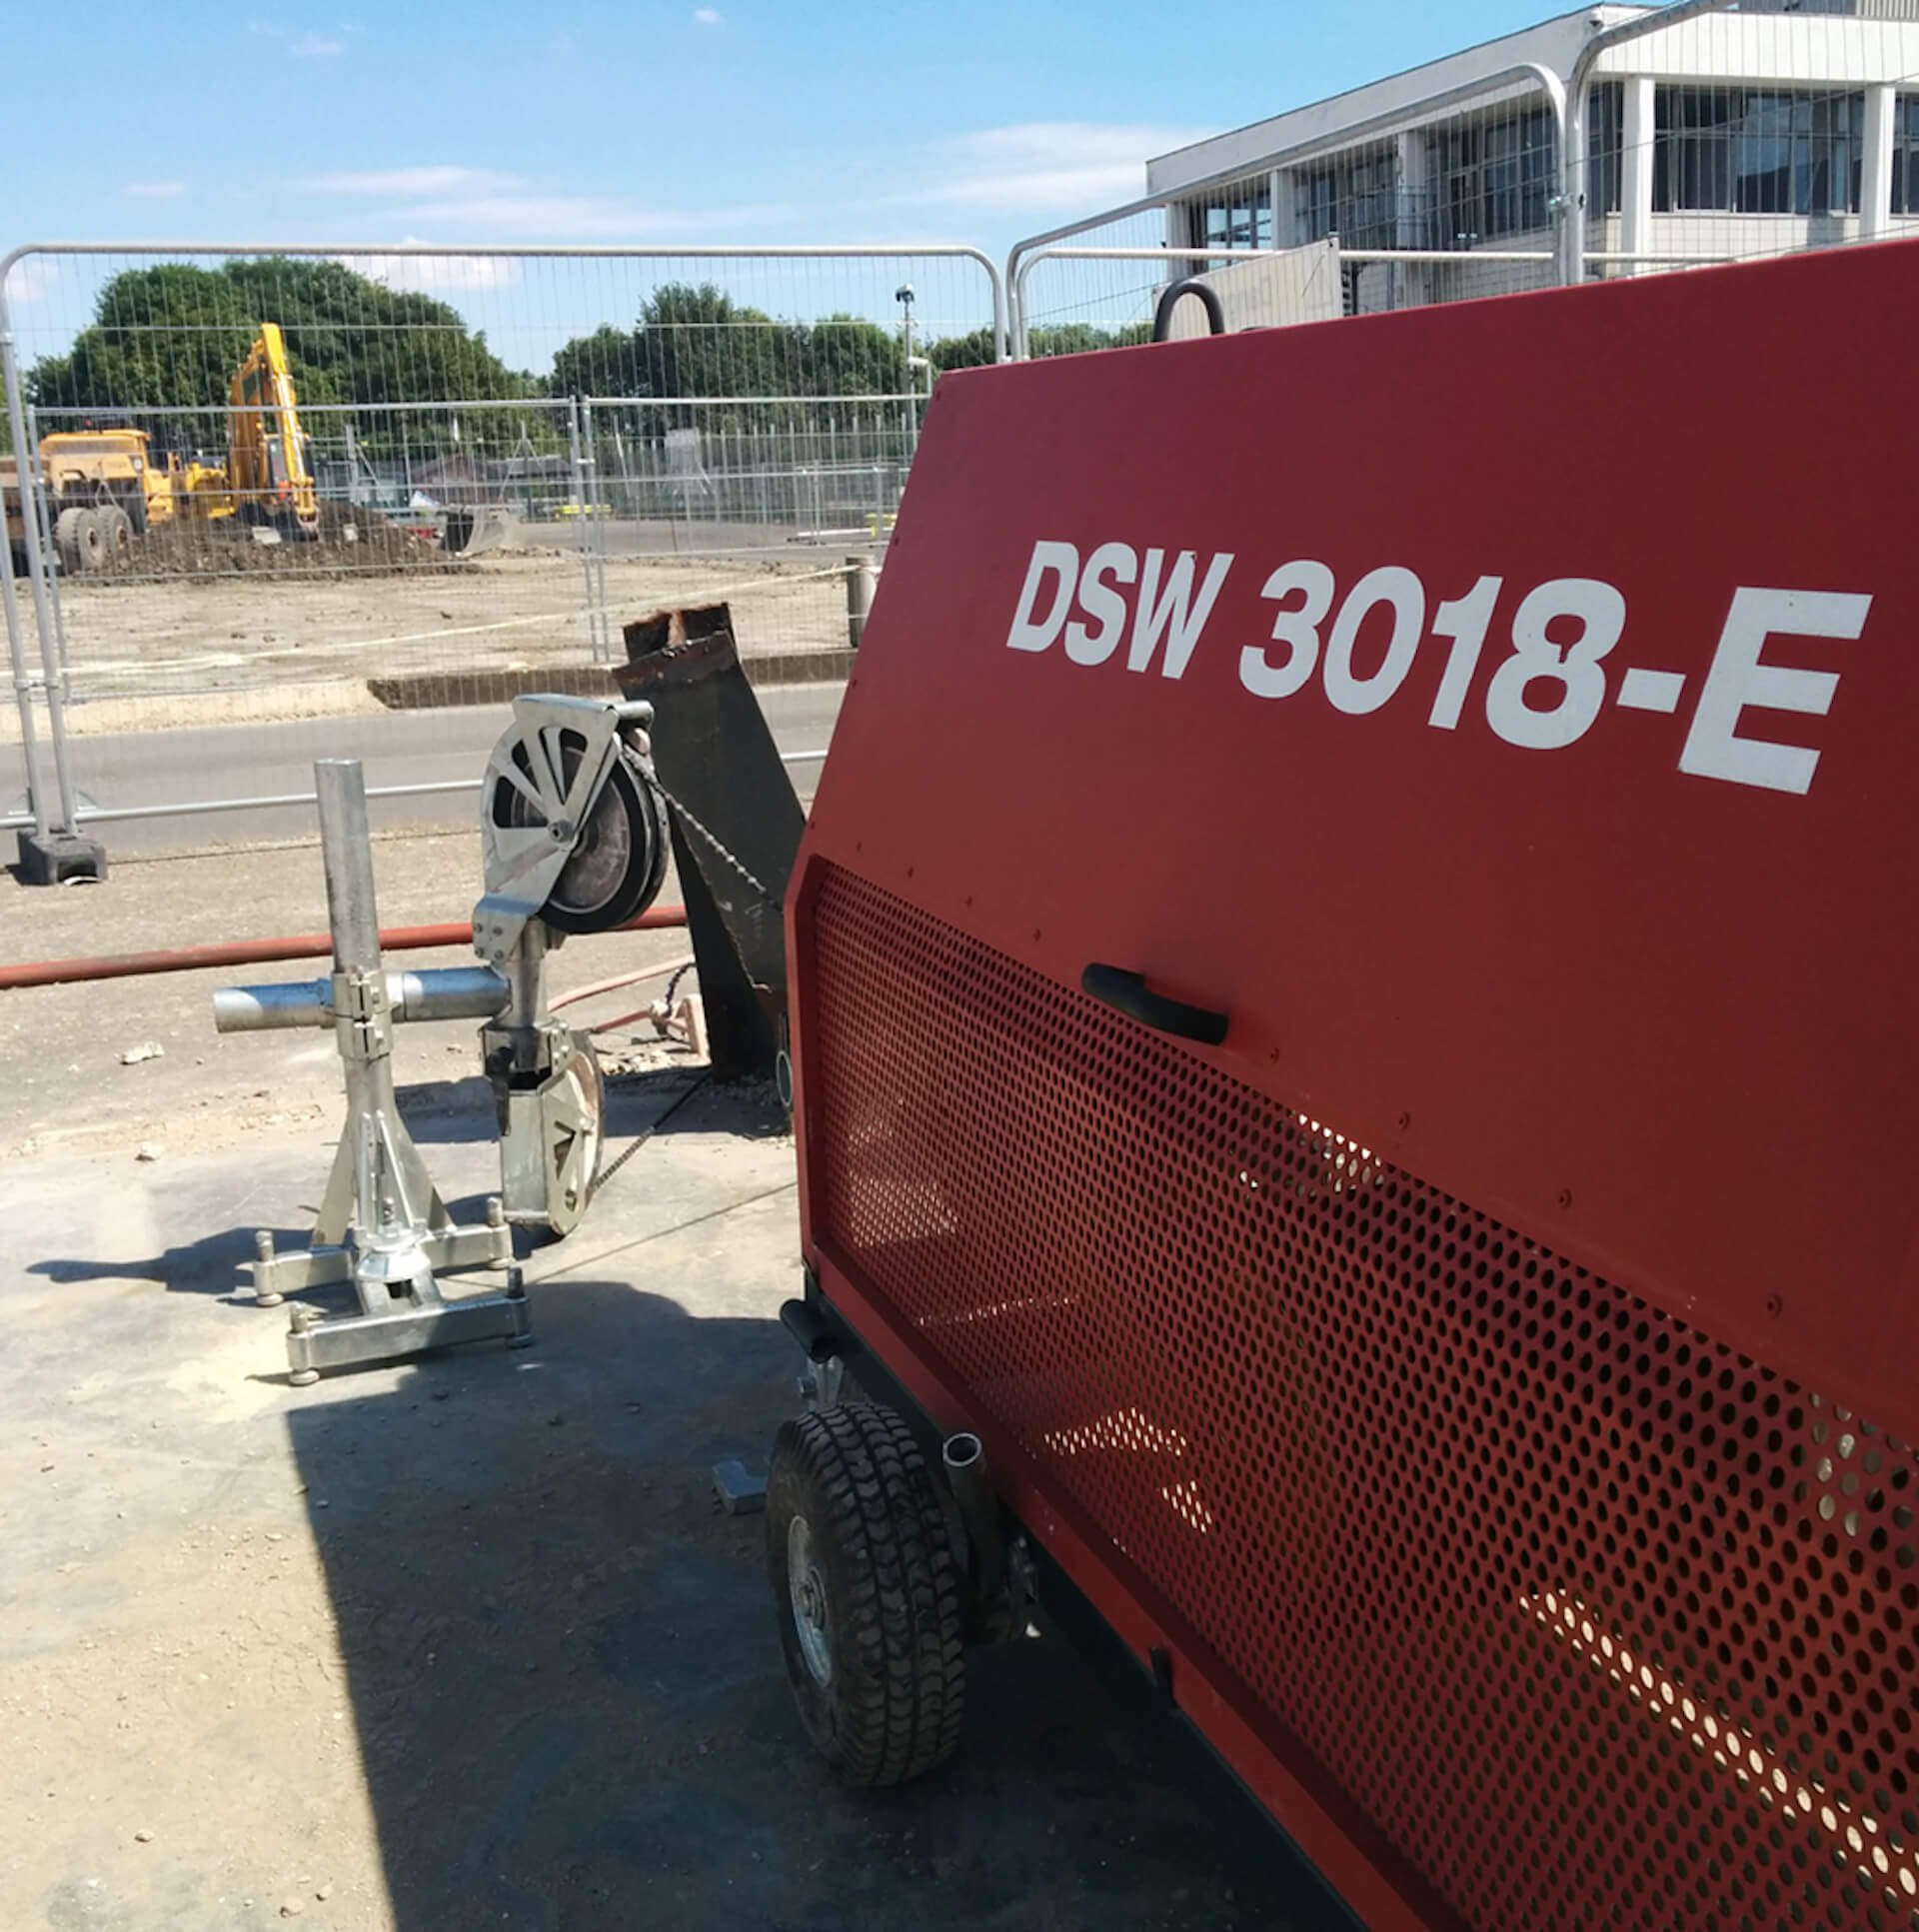 image of a red generator onsite.